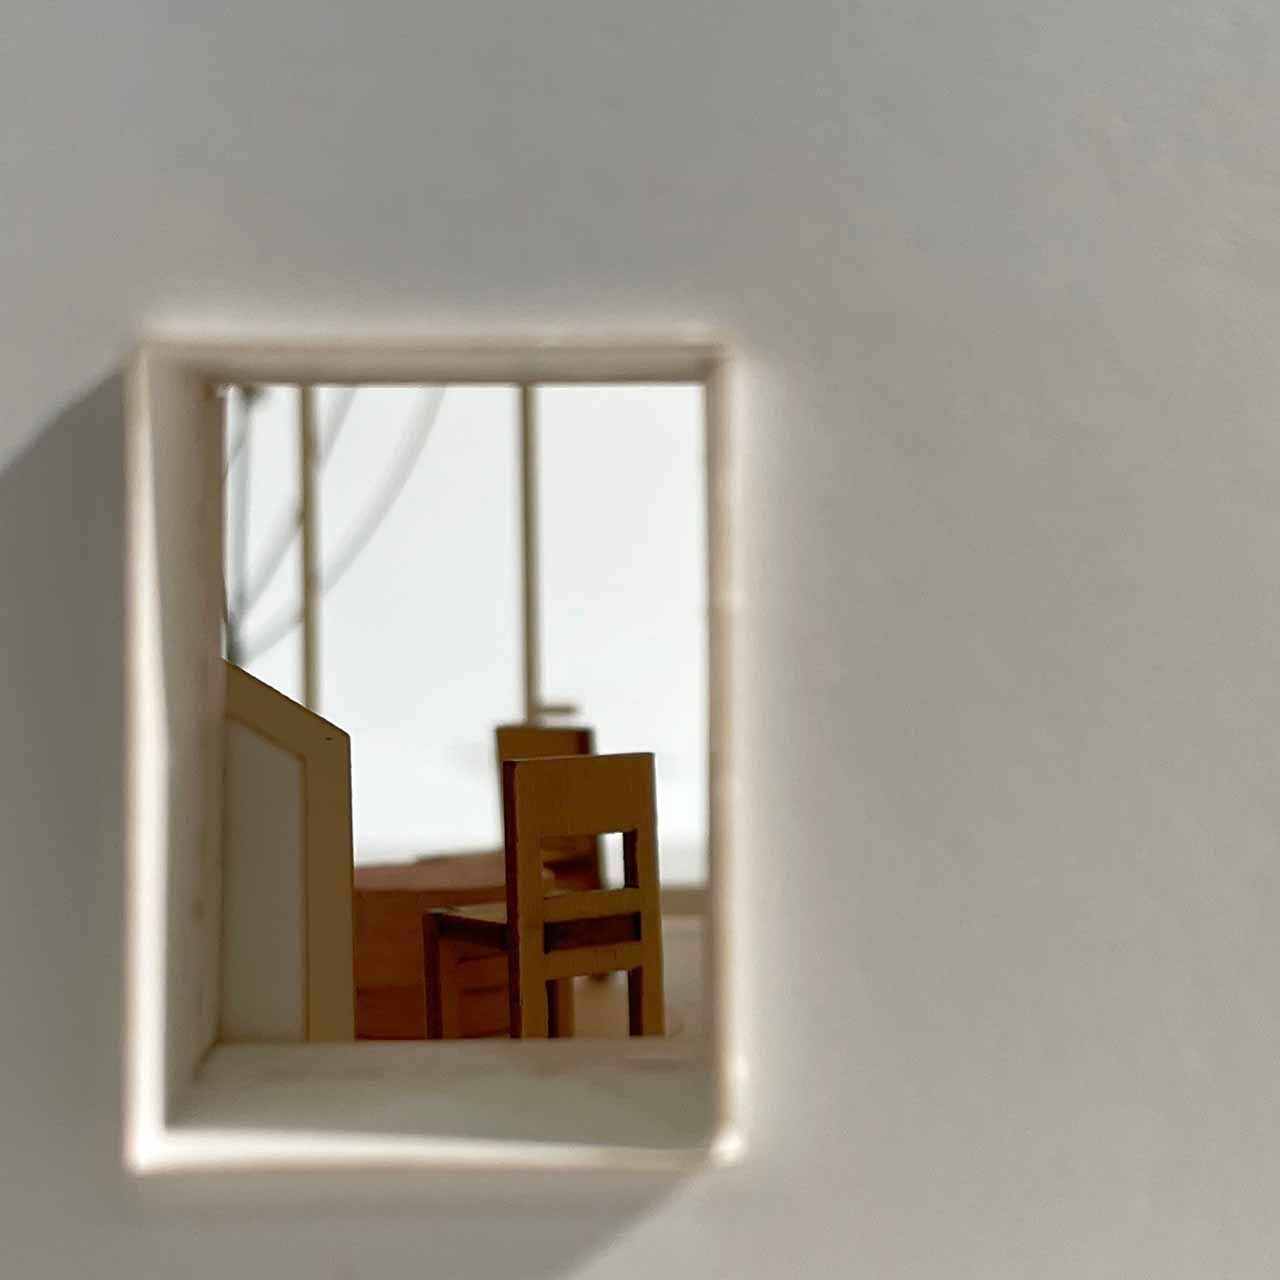 Close-up model photo of one of the windows in the facade